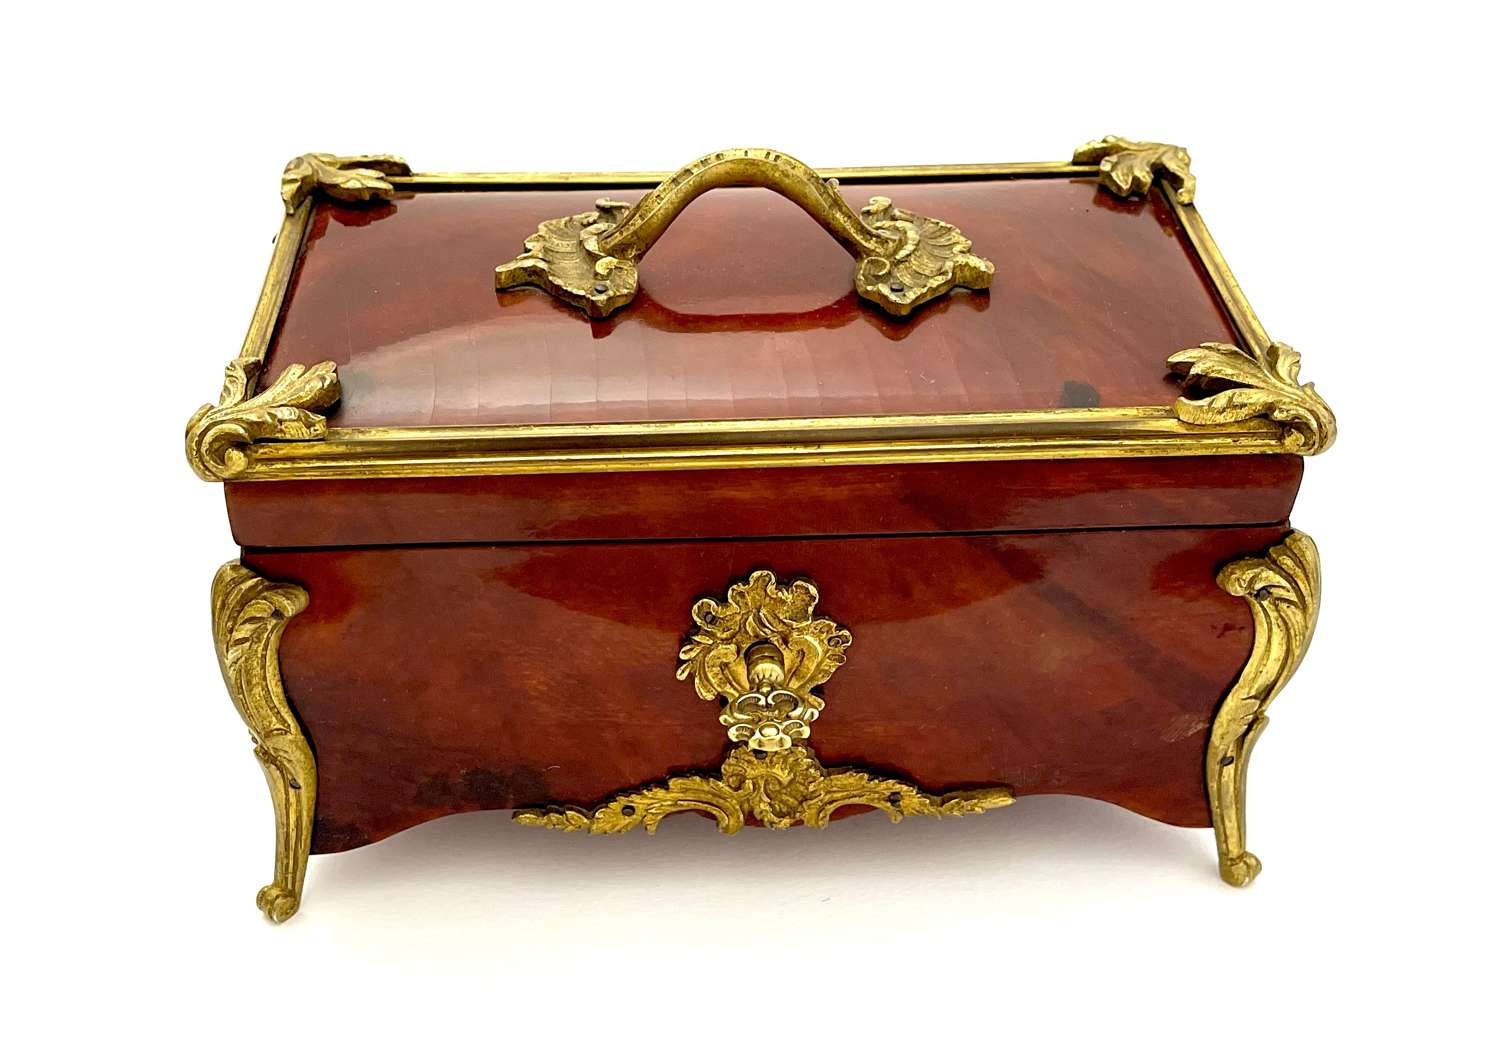 An Exceptionally Fine Antique French Tortoiseshell Jewellery Box